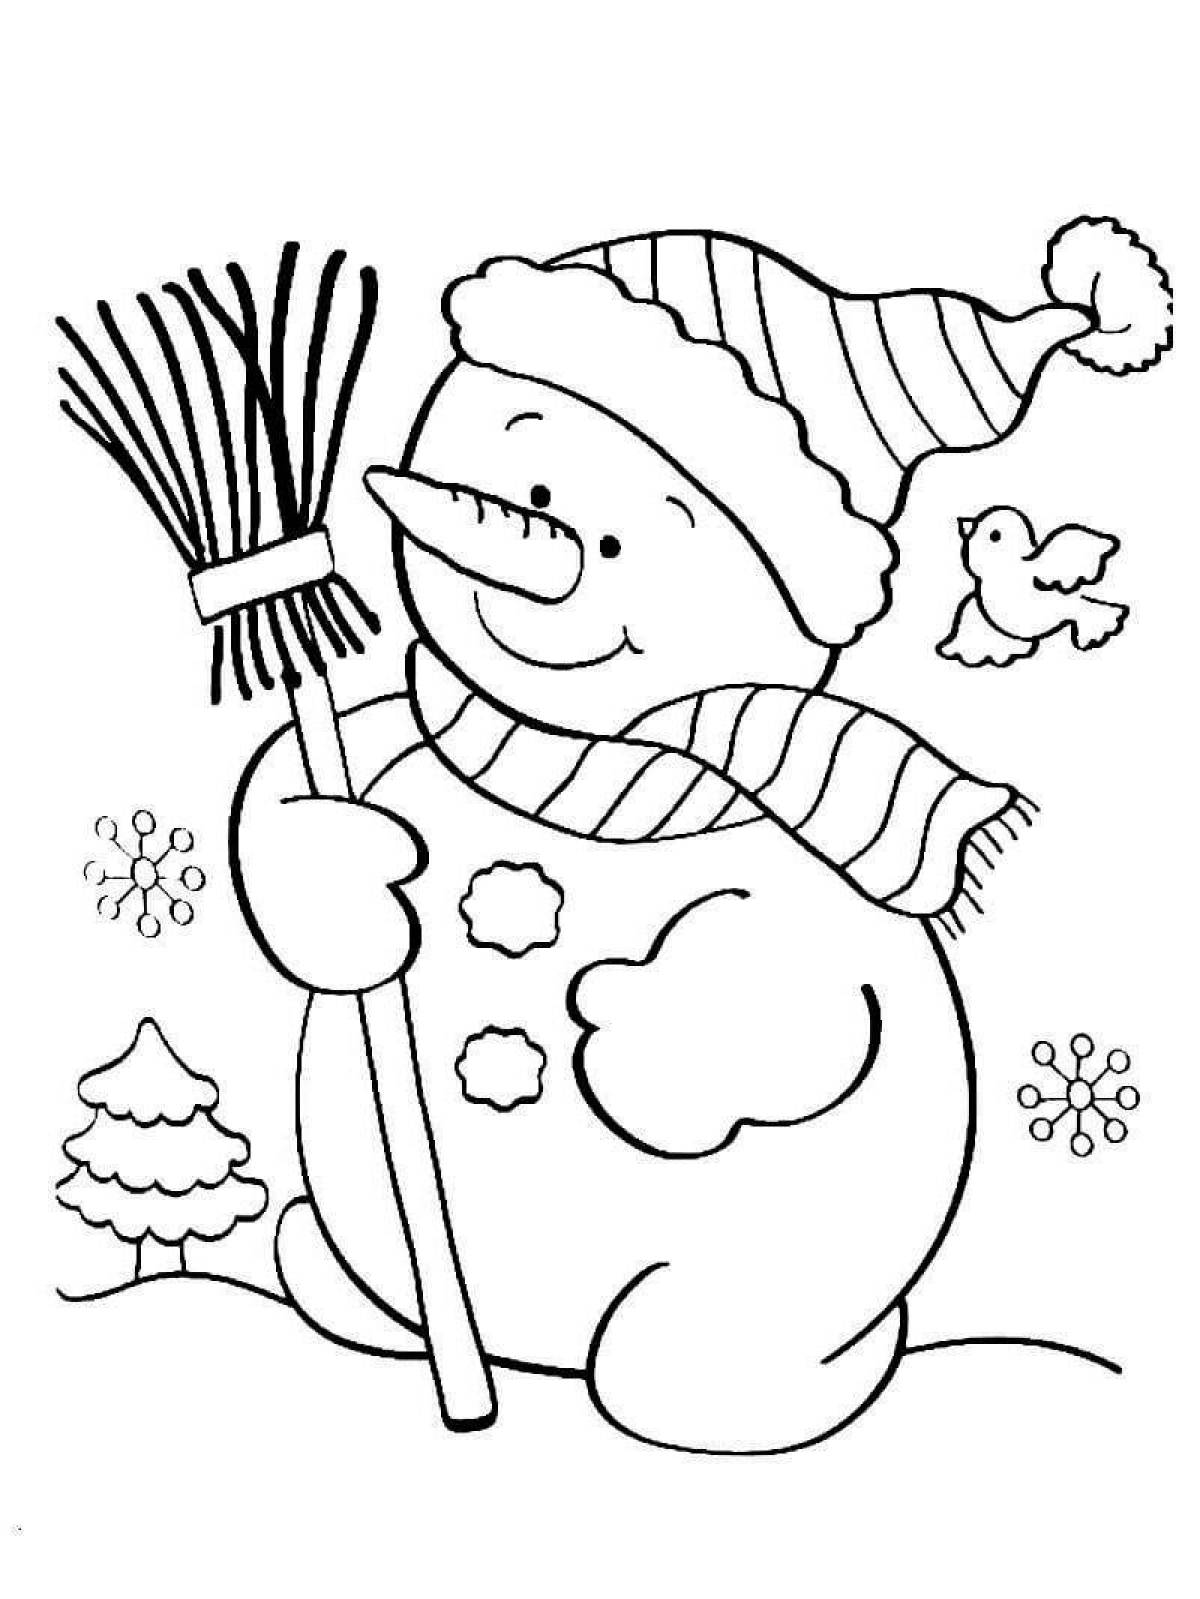 Glitter snowman coloring book for kids 4-5 years old